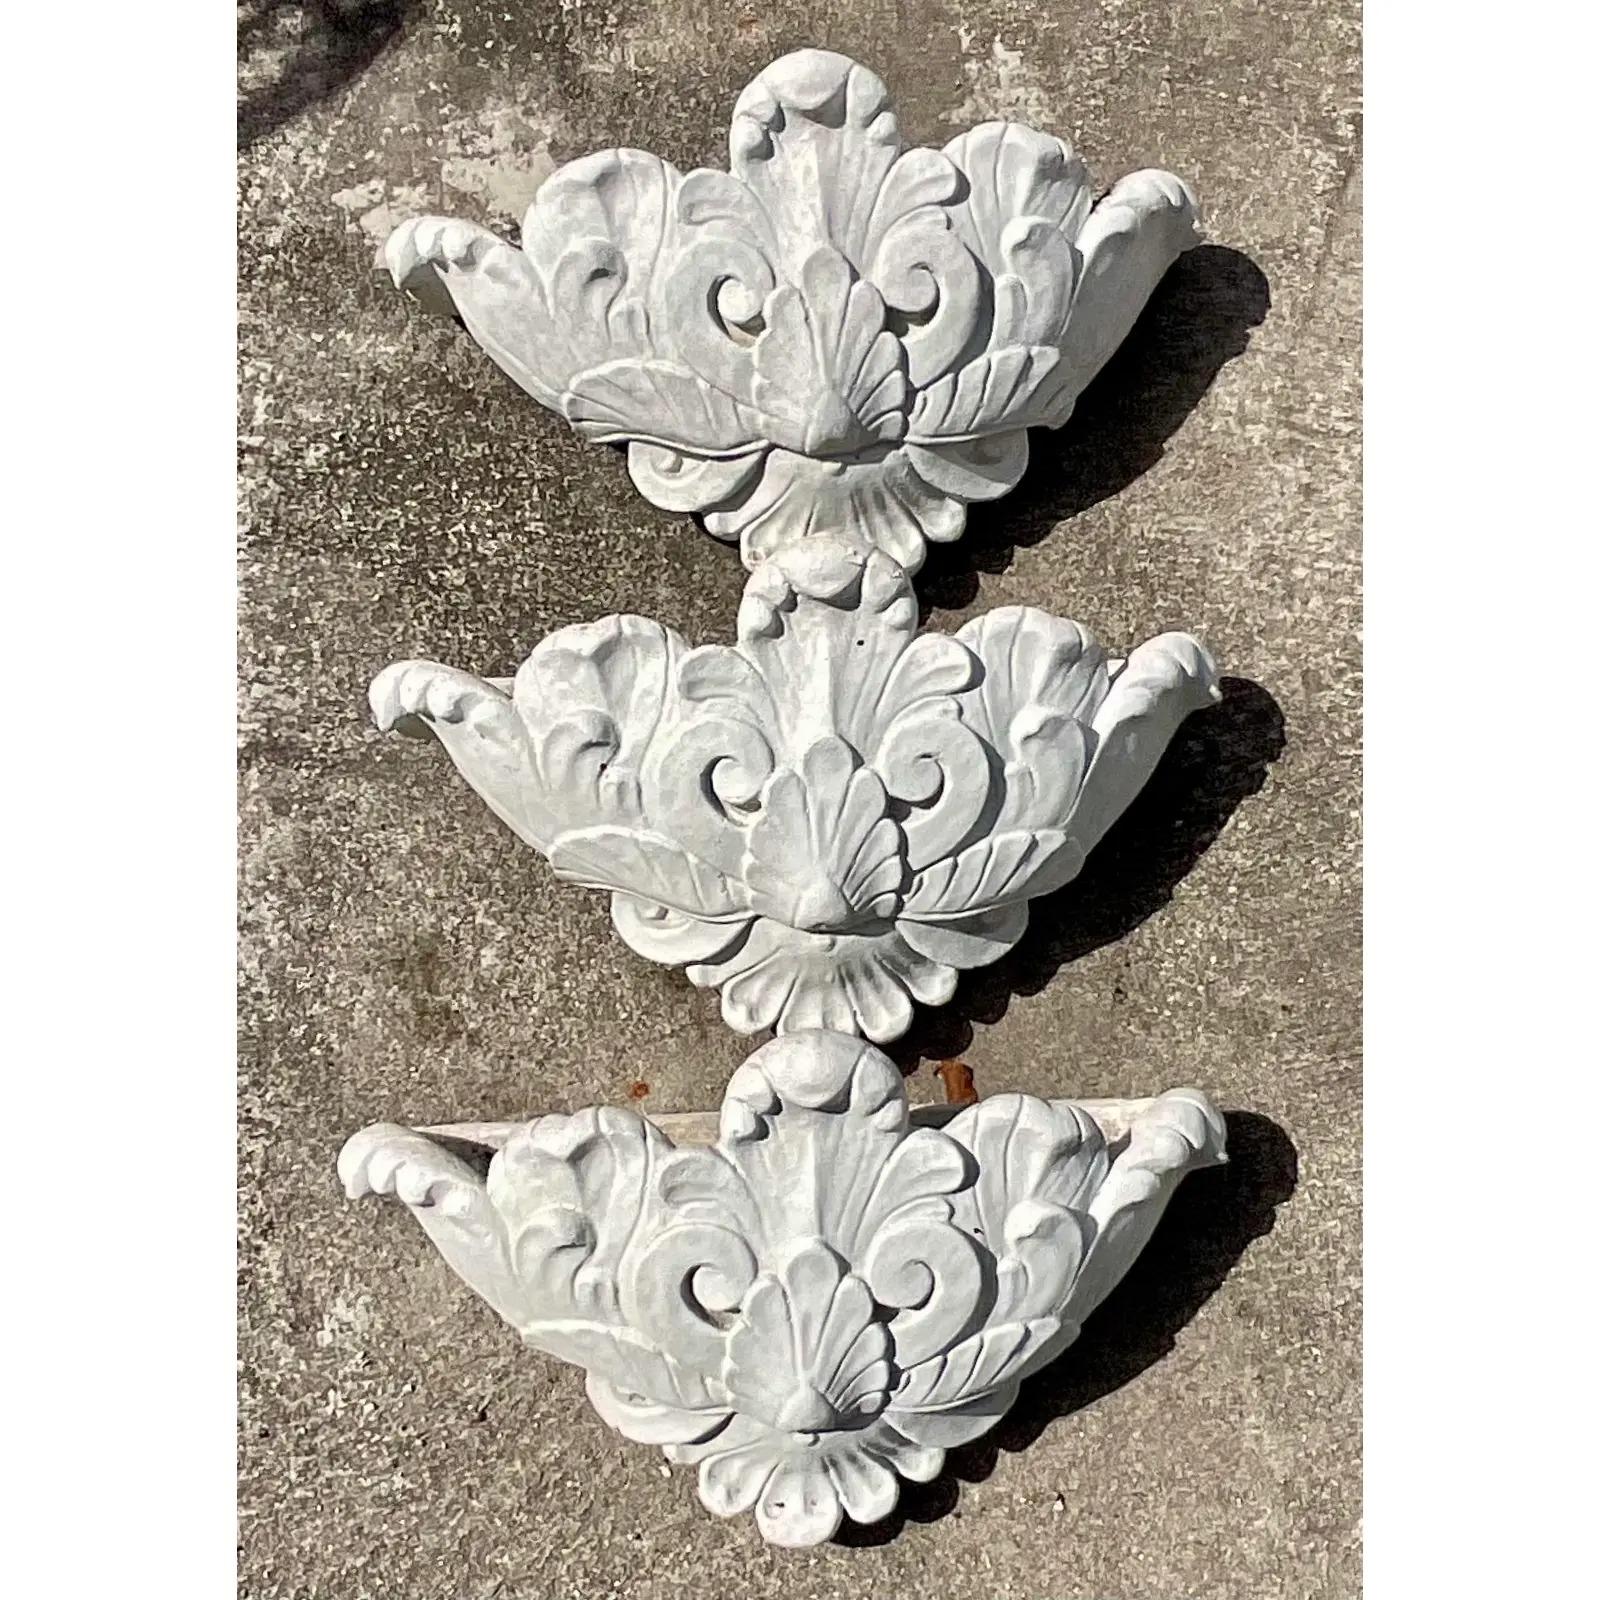 A fabulous set of three vintage Regency wall pockets. Made of a cast concrete with lots of room for your plants. Perfect for orchids. Perfect as is or paint a bright white for a fresh finish. Acquired from a Palm Beach estate.